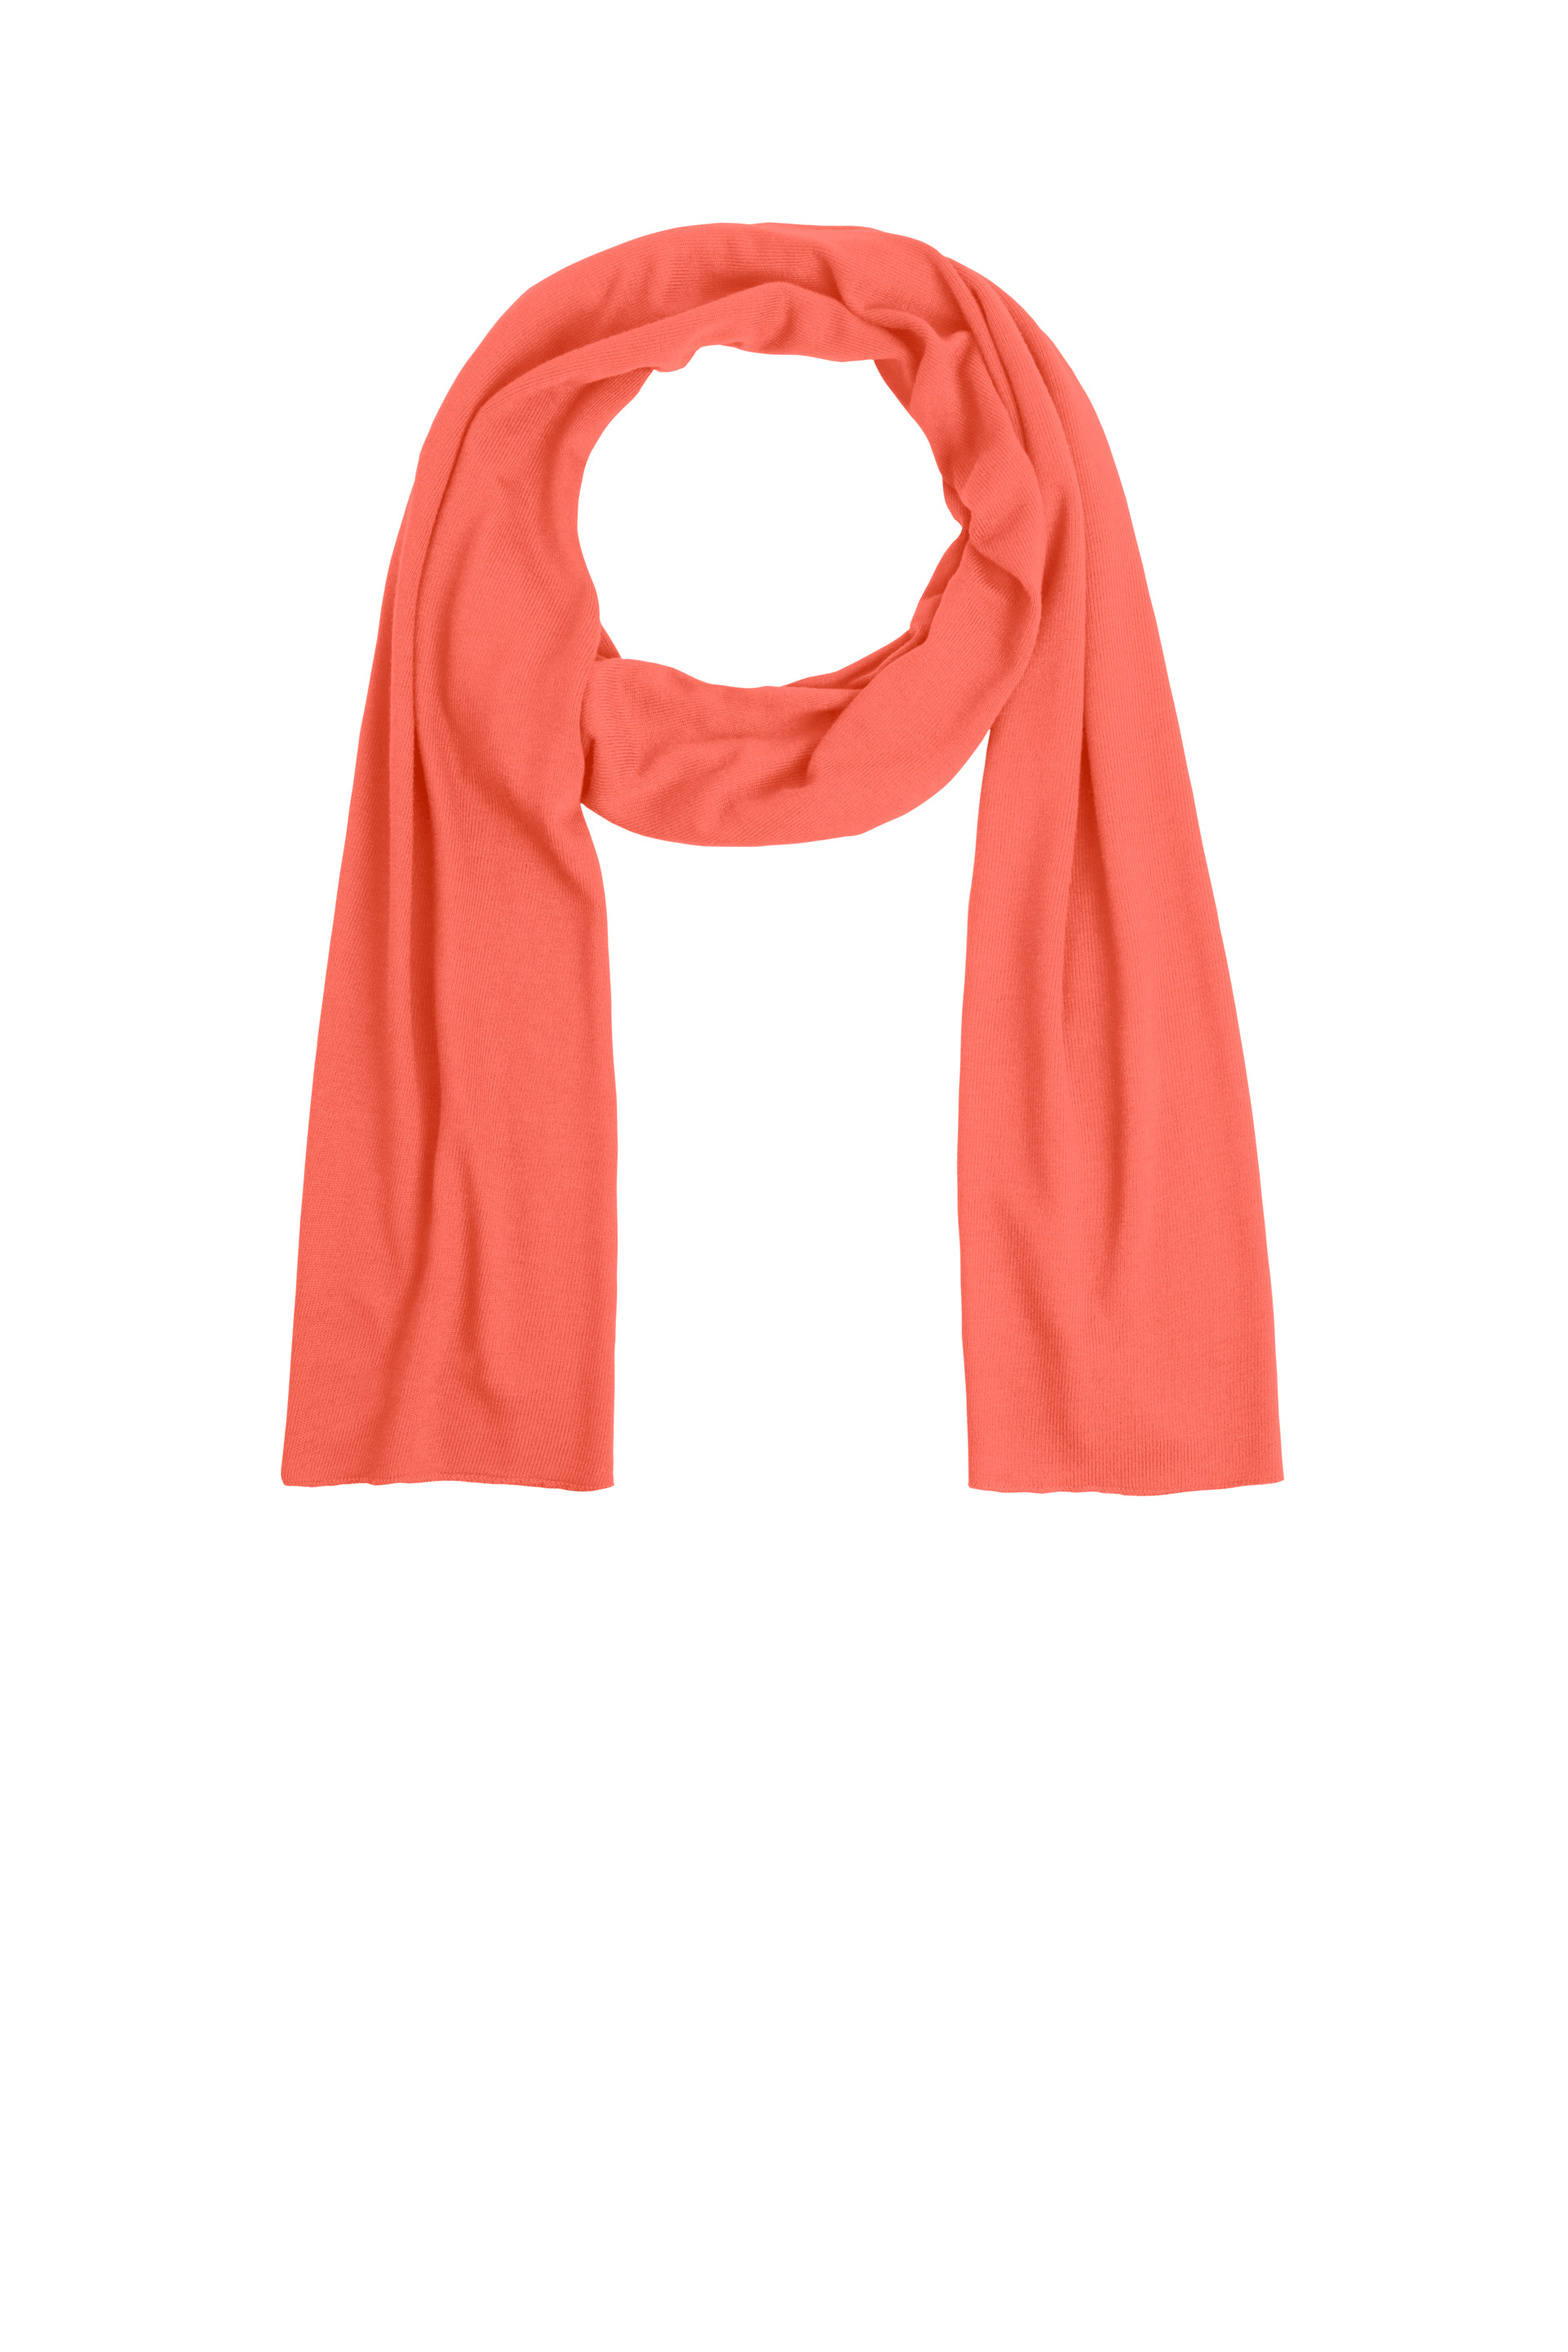 33028_willow_scarf_coral.jpg